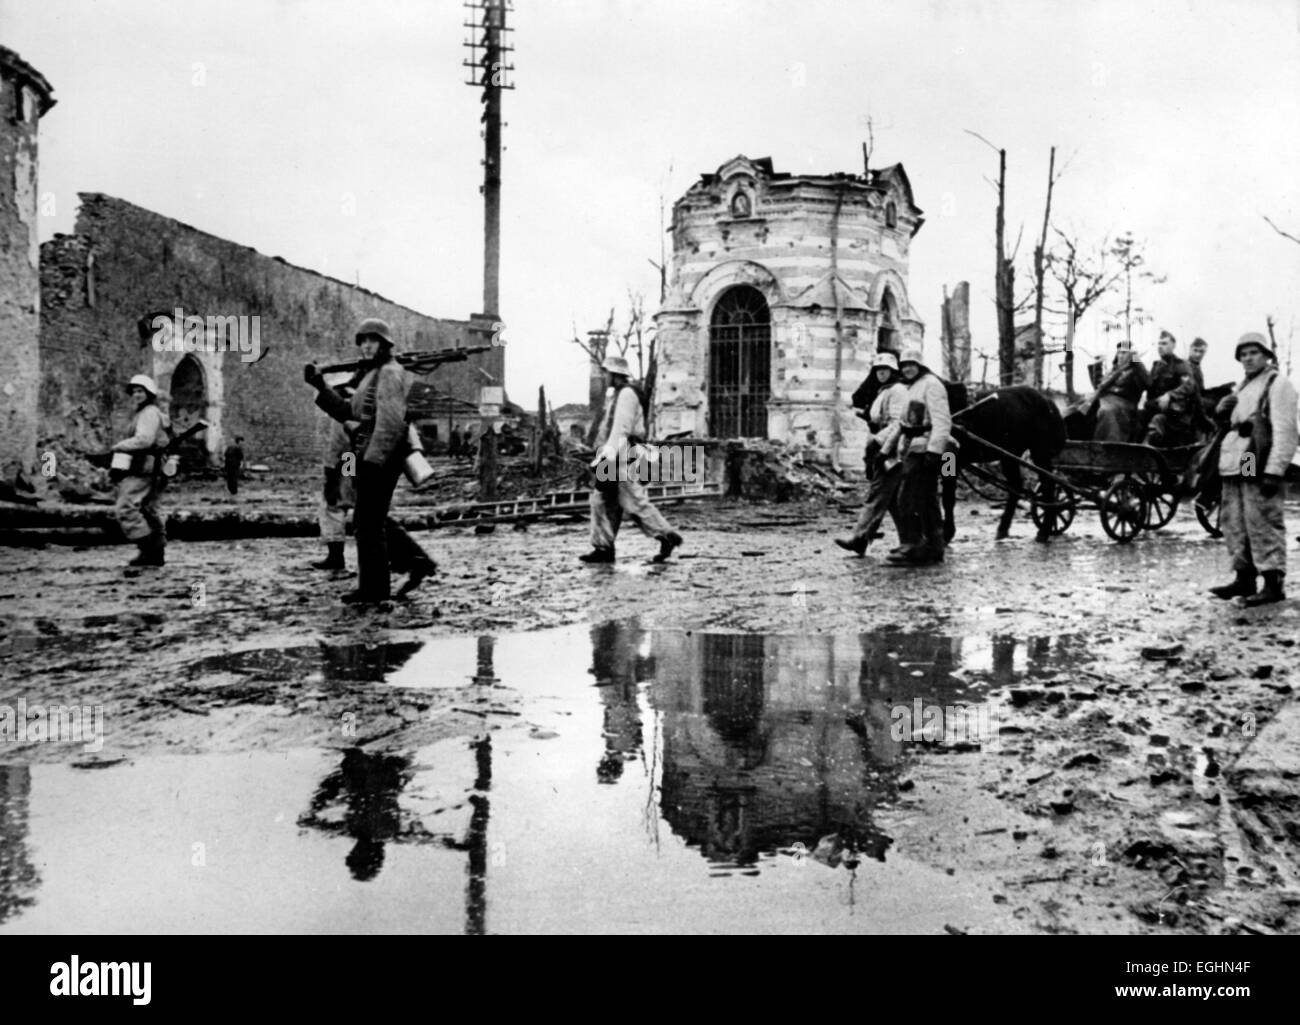 A Nazi propaganda picture shows infantrymen of the Waffen-SS marching through the ruines of the destroyed city of Narva on the Narva Front during World War II in April 1944. Fotoarchiv für Zeitgeschichtee - NO WIRE SERVICE - Stock Photo